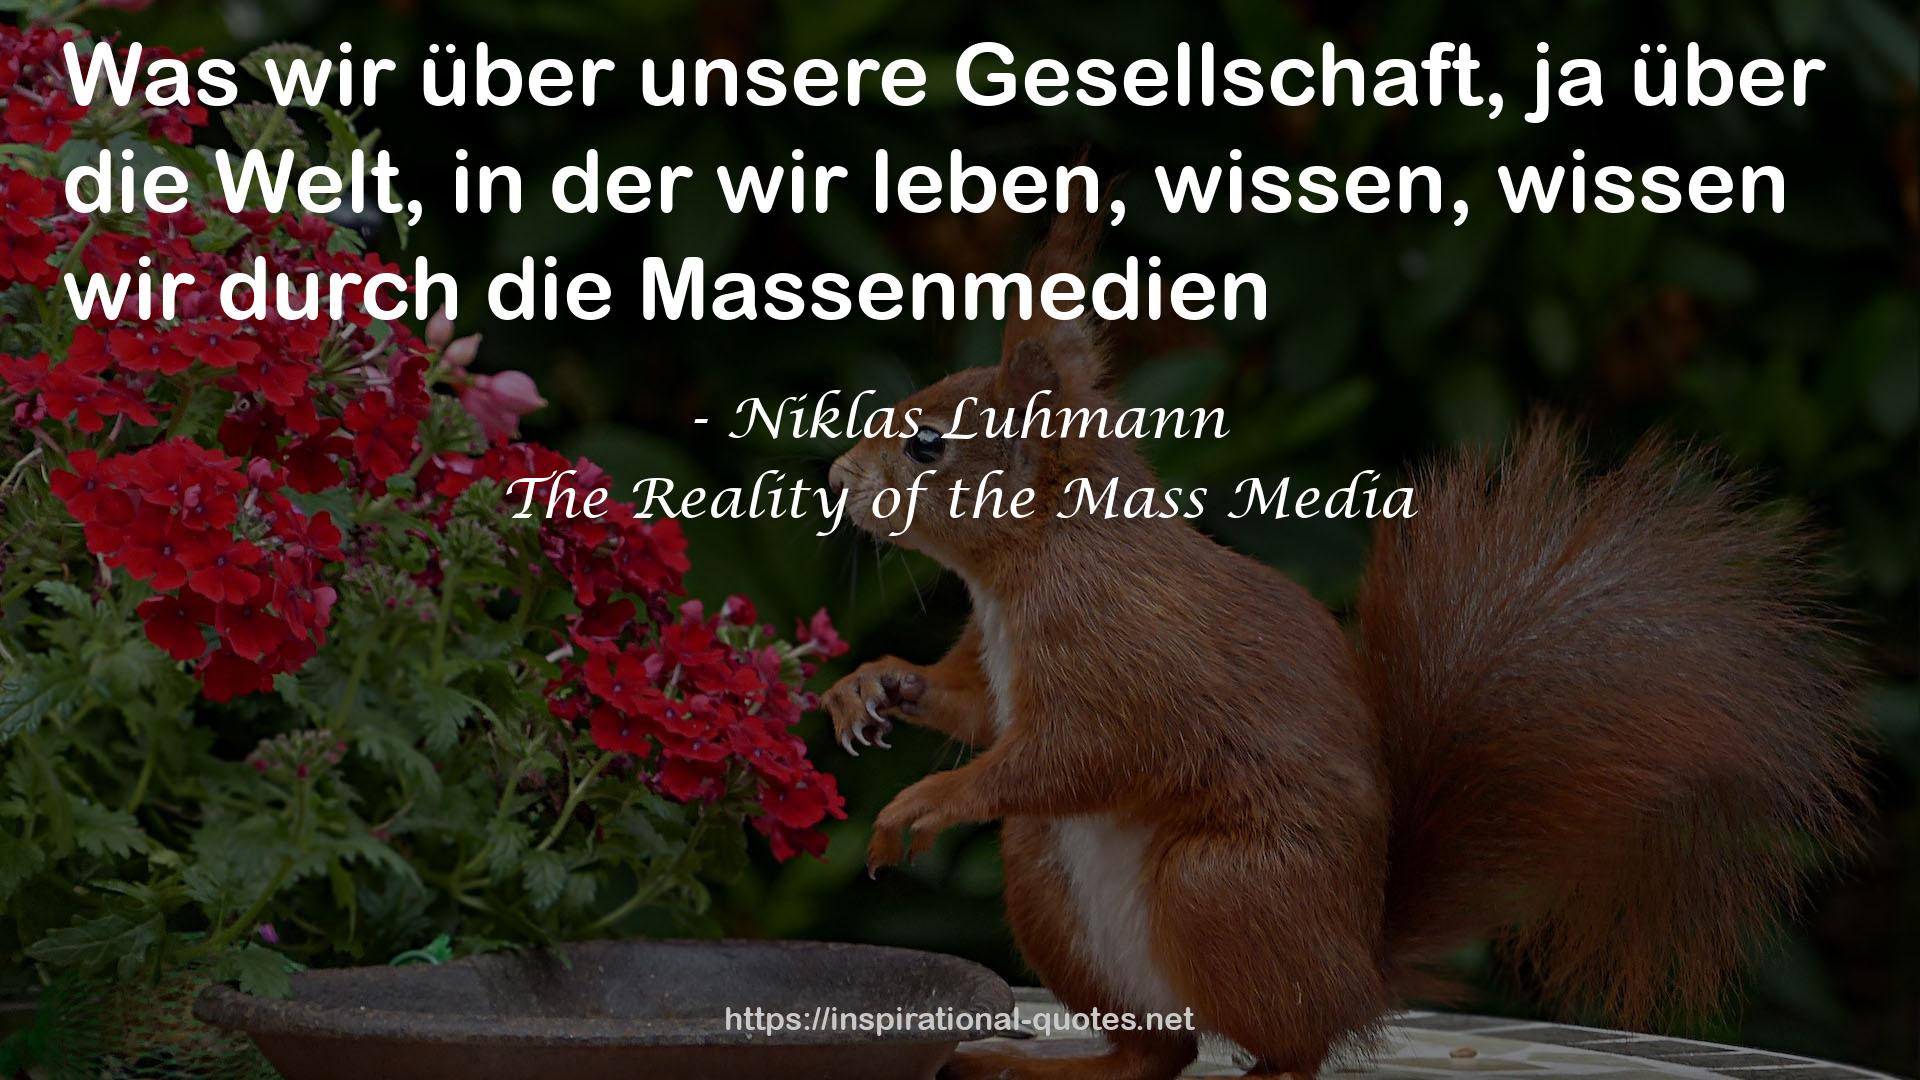 The Reality of the Mass Media QUOTES